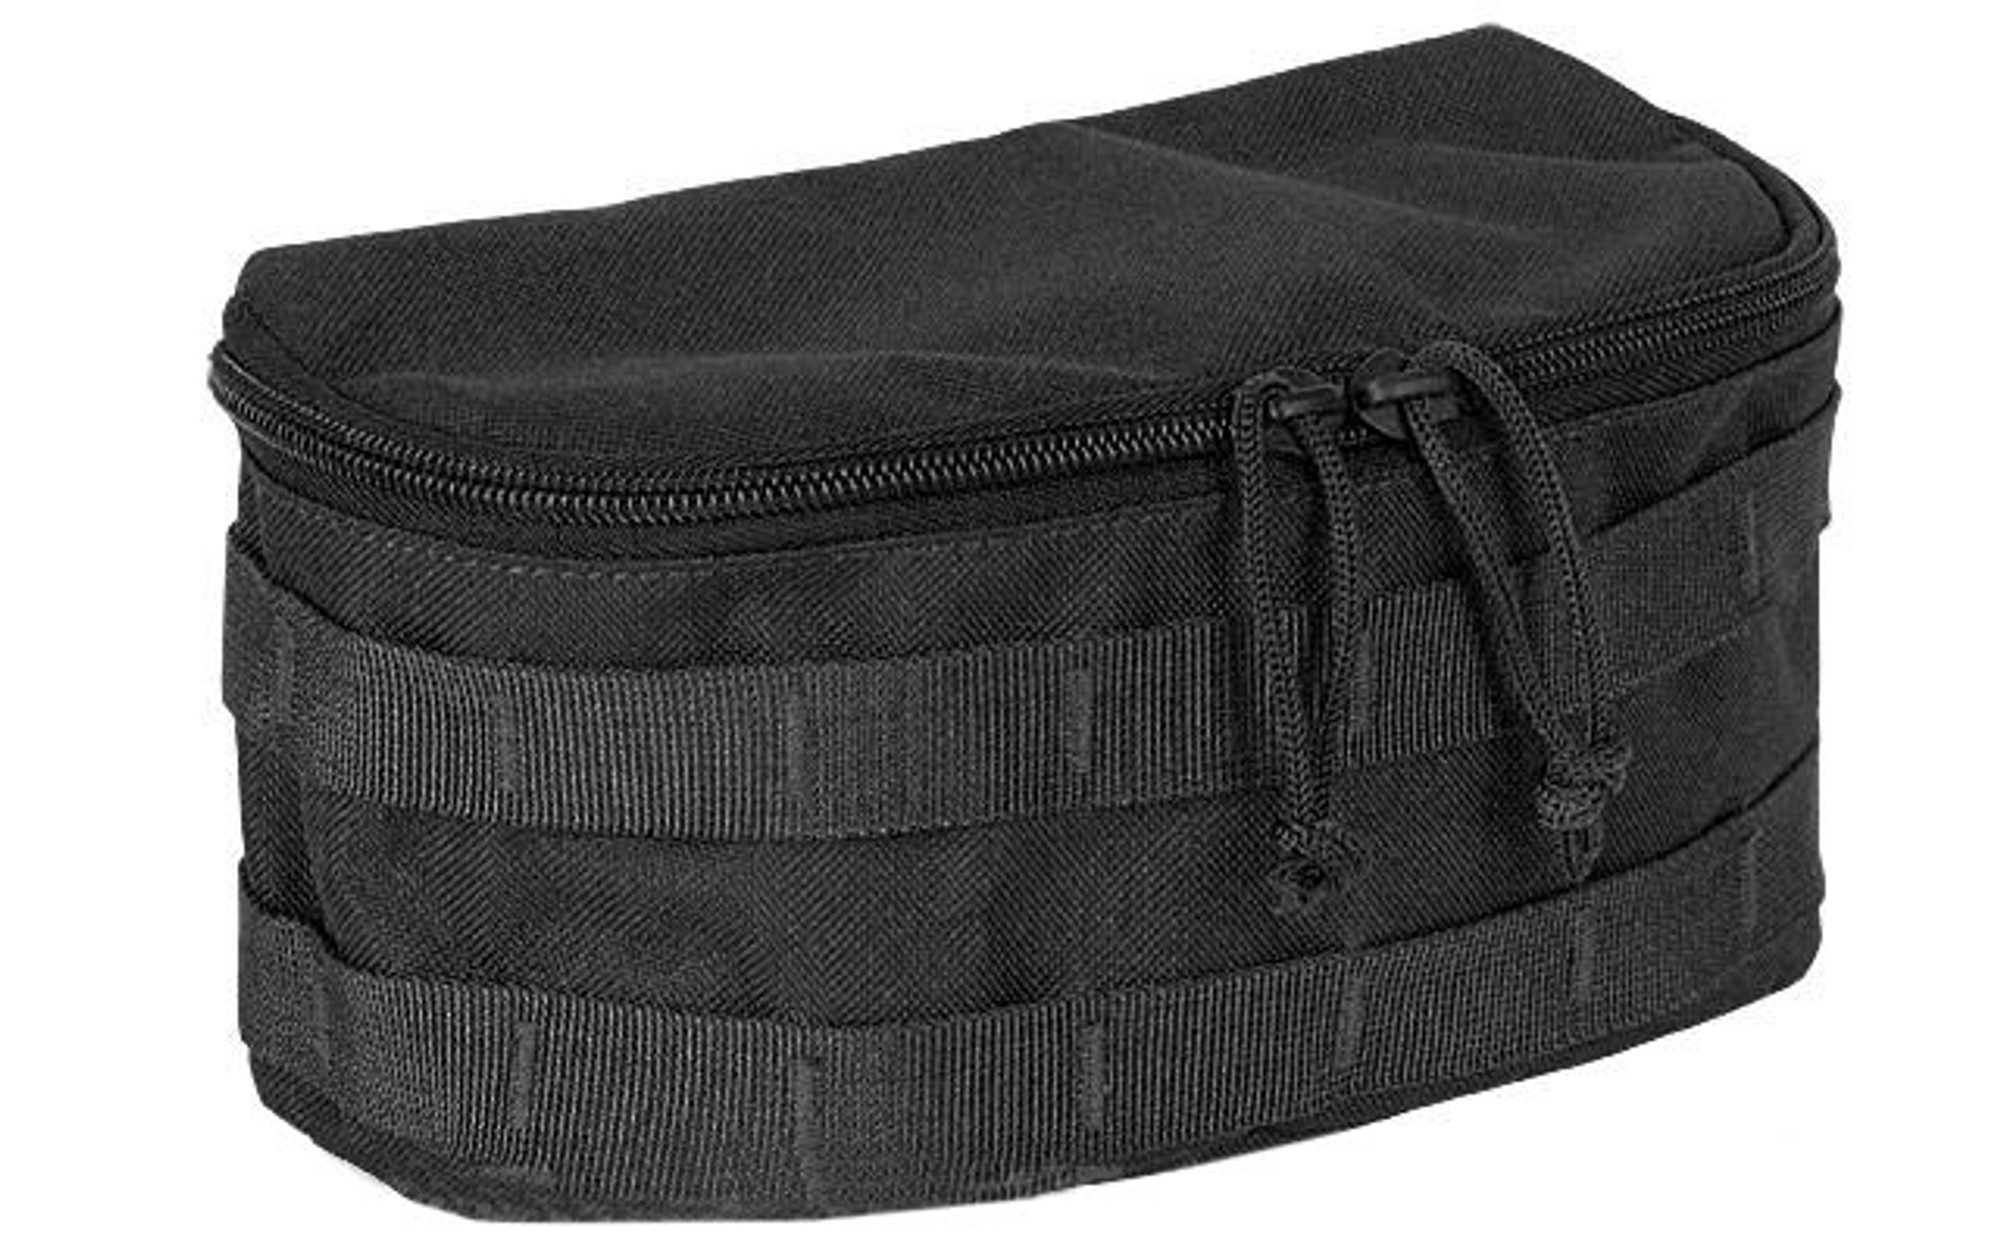 Voodoo Tactical Rounded MOLLE Utility Pouch